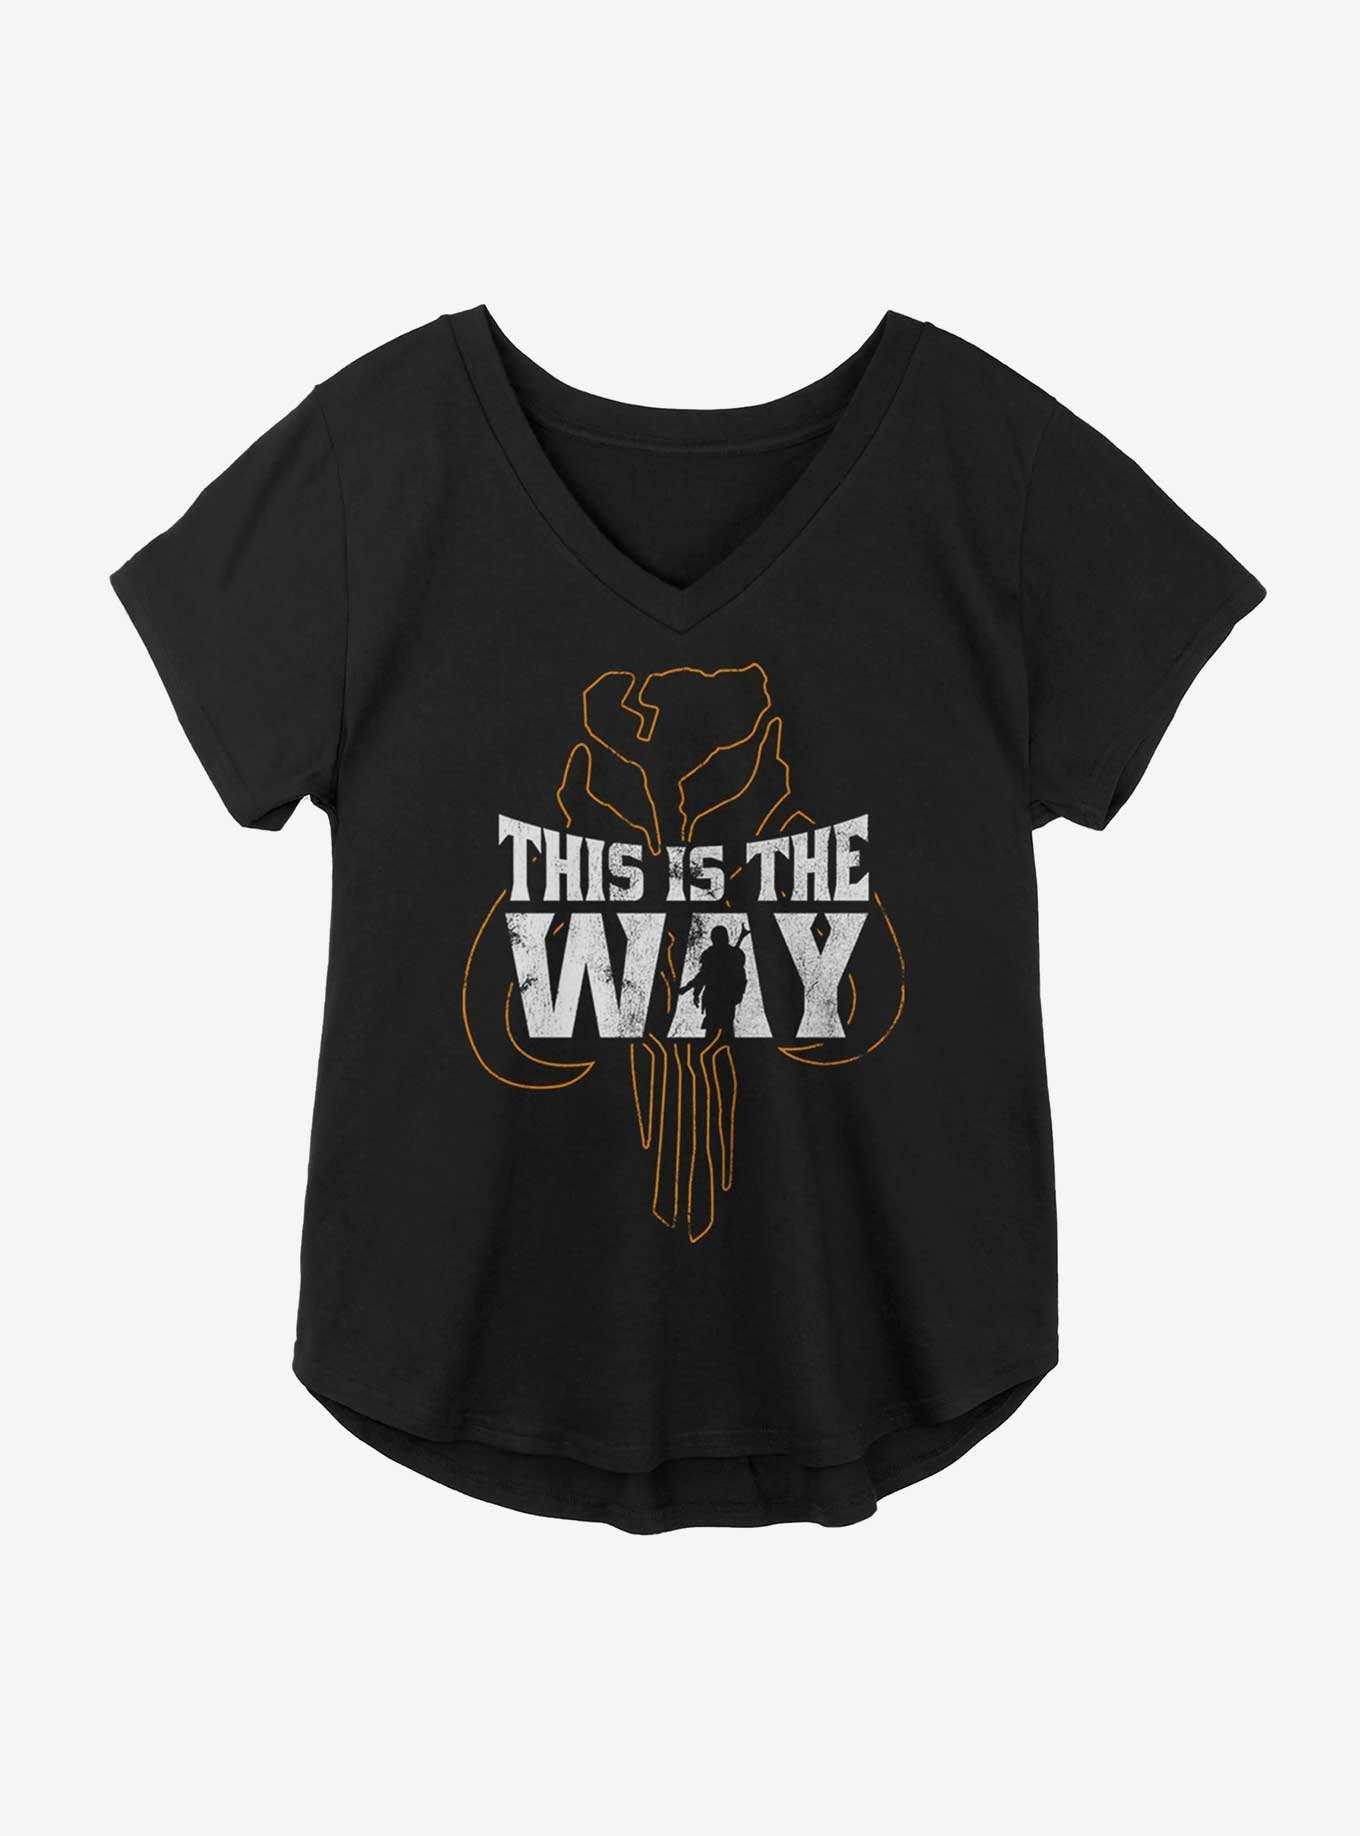 Star Wars The Mandalorian This Is The Way Girls Plus Size T-Shirt, , hi-res